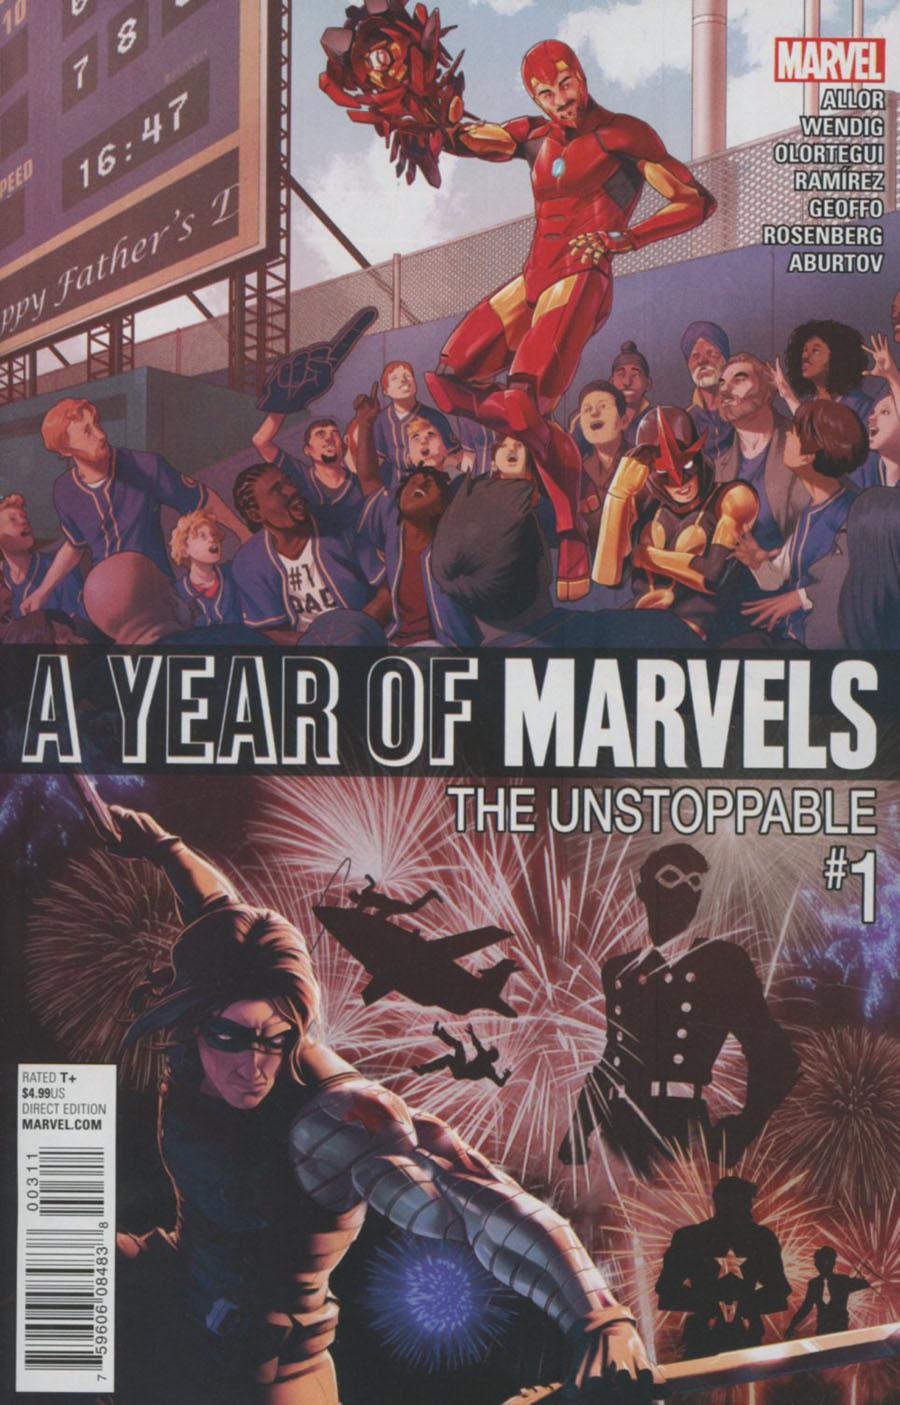 A Year Of Marvels Unstoppable Vol. 1 #1